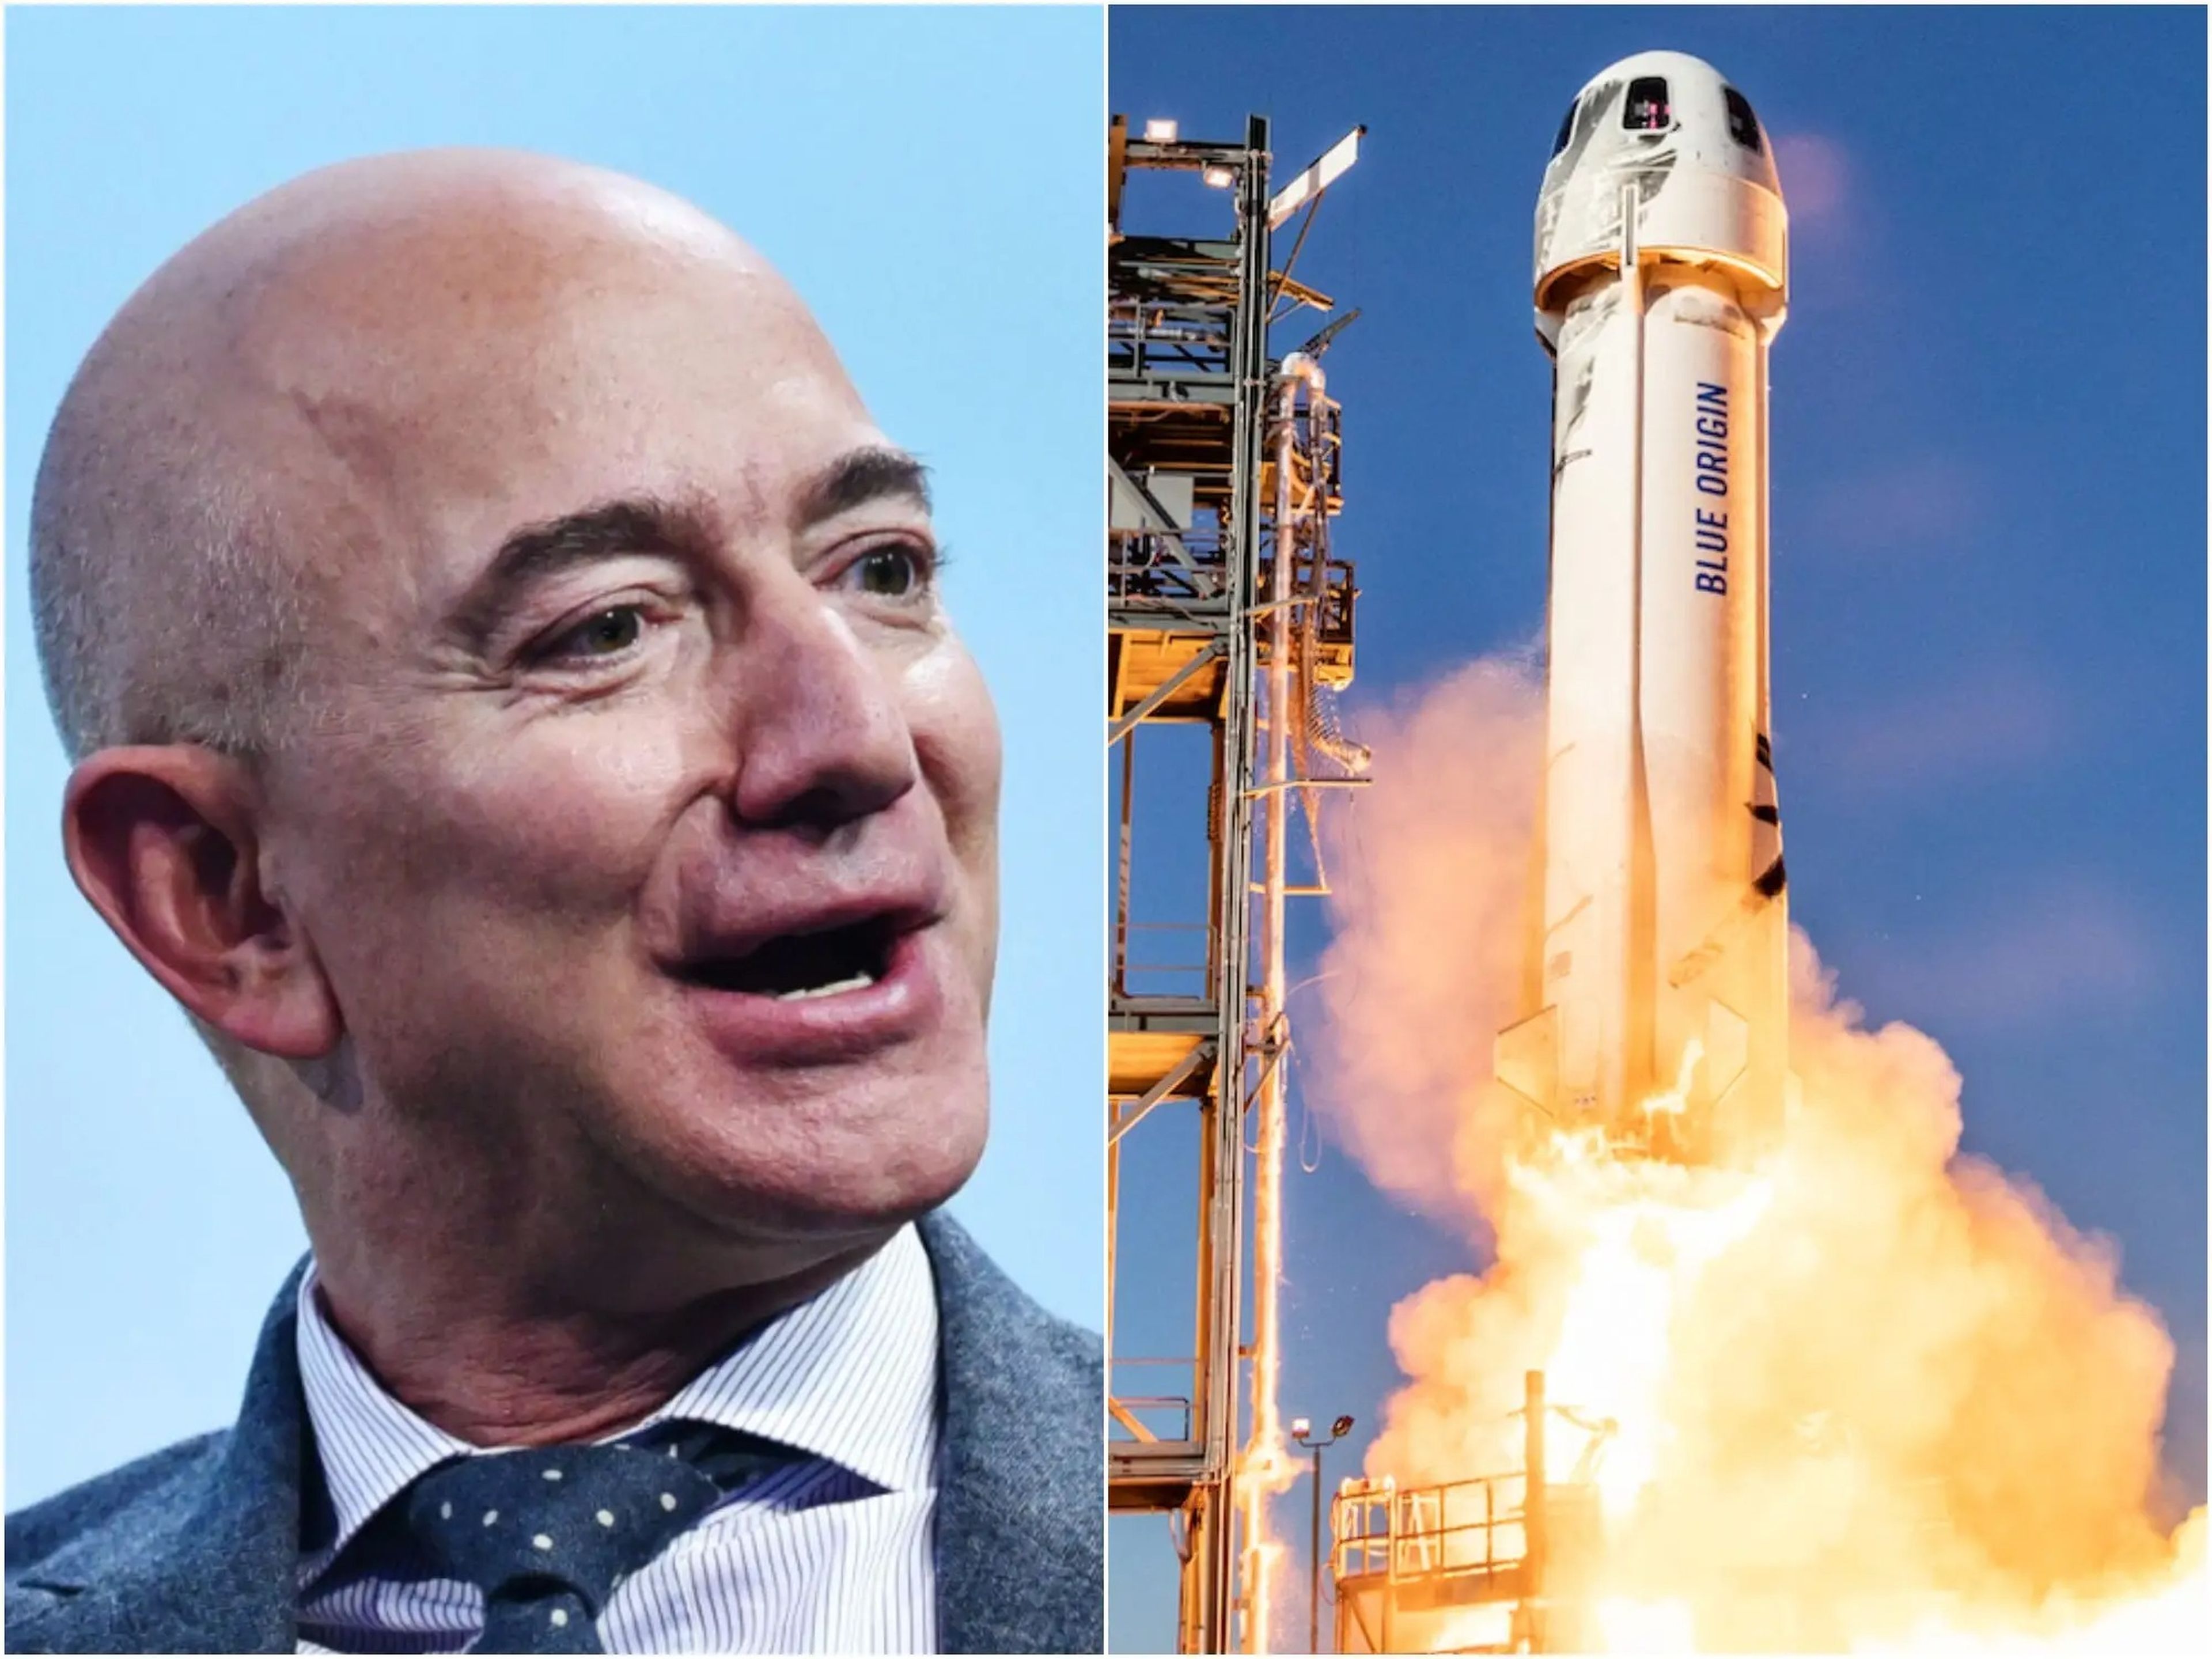 Jeff Bezos (left) is set to launch aboard the New Shepard rocket (right) on July 20.